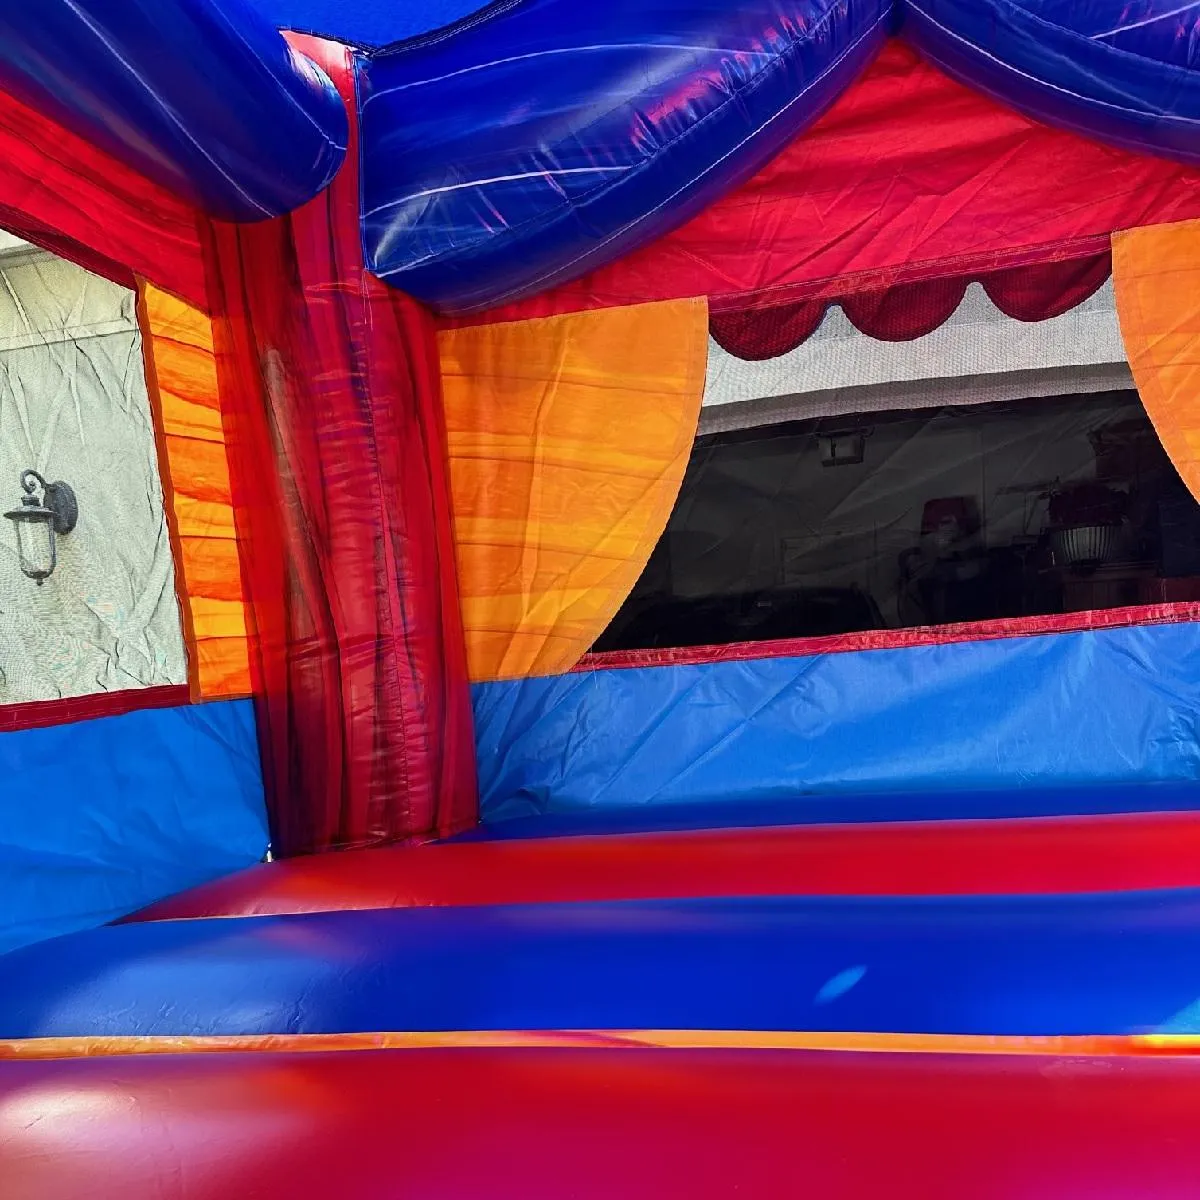 Primary Castle Bounce House 5